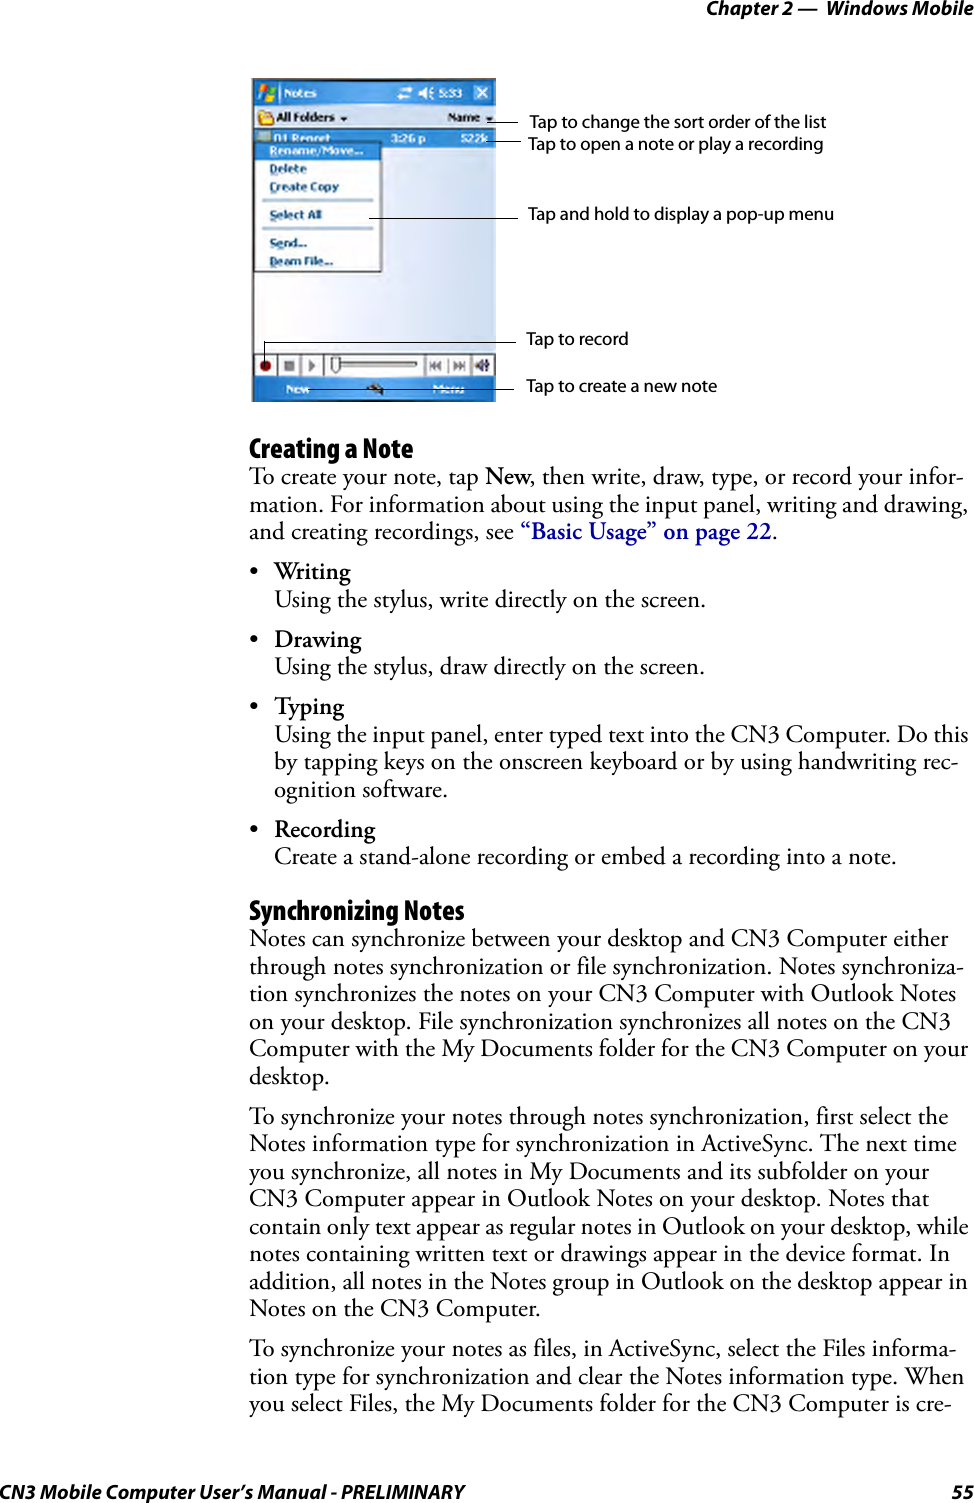 Chapter 2 —  Windows MobileCN3 Mobile Computer User’s Manual - PRELIMINARY 55Creating a NoteTo create your note, tap New, then write, draw, type, or record your infor-mation. For information about using the input panel, writing and drawing, and creating recordings, see “Basic Usage” on page 22.•WritingUsing the stylus, write directly on the screen.•DrawingUsing the stylus, draw directly on the screen.•TypingUsing the input panel, enter typed text into the CN3 Computer. Do this by tapping keys on the onscreen keyboard or by using handwriting rec-ognition software.•RecordingCreate a stand-alone recording or embed a recording into a note.Synchronizing NotesNotes can synchronize between your desktop and CN3 Computer either through notes synchronization or file synchronization. Notes synchroniza-tion synchronizes the notes on your CN3 Computer with Outlook Notes on your desktop. File synchronization synchronizes all notes on the CN3 Computer with the My Documents folder for the CN3 Computer on your desktop.To synchronize your notes through notes synchronization, first select the Notes information type for synchronization in ActiveSync. The next time you synchronize, all notes in My Documents and its subfolder on your CN3 Computer appear in Outlook Notes on your desktop. Notes that contain only text appear as regular notes in Outlook on your desktop, while notes containing written text or drawings appear in the device format. In addition, all notes in the Notes group in Outlook on the desktop appear in Notes on the CN3 Computer.To synchronize your notes as files, in ActiveSync, select the Files informa-tion type for synchronization and clear the Notes information type. When you select Files, the My Documents folder for the CN3 Computer is cre-Tap to change the sort order of the listTap to open a note or play a recordingTap and hold to display a pop-up menuTap to recordTap to create a new note